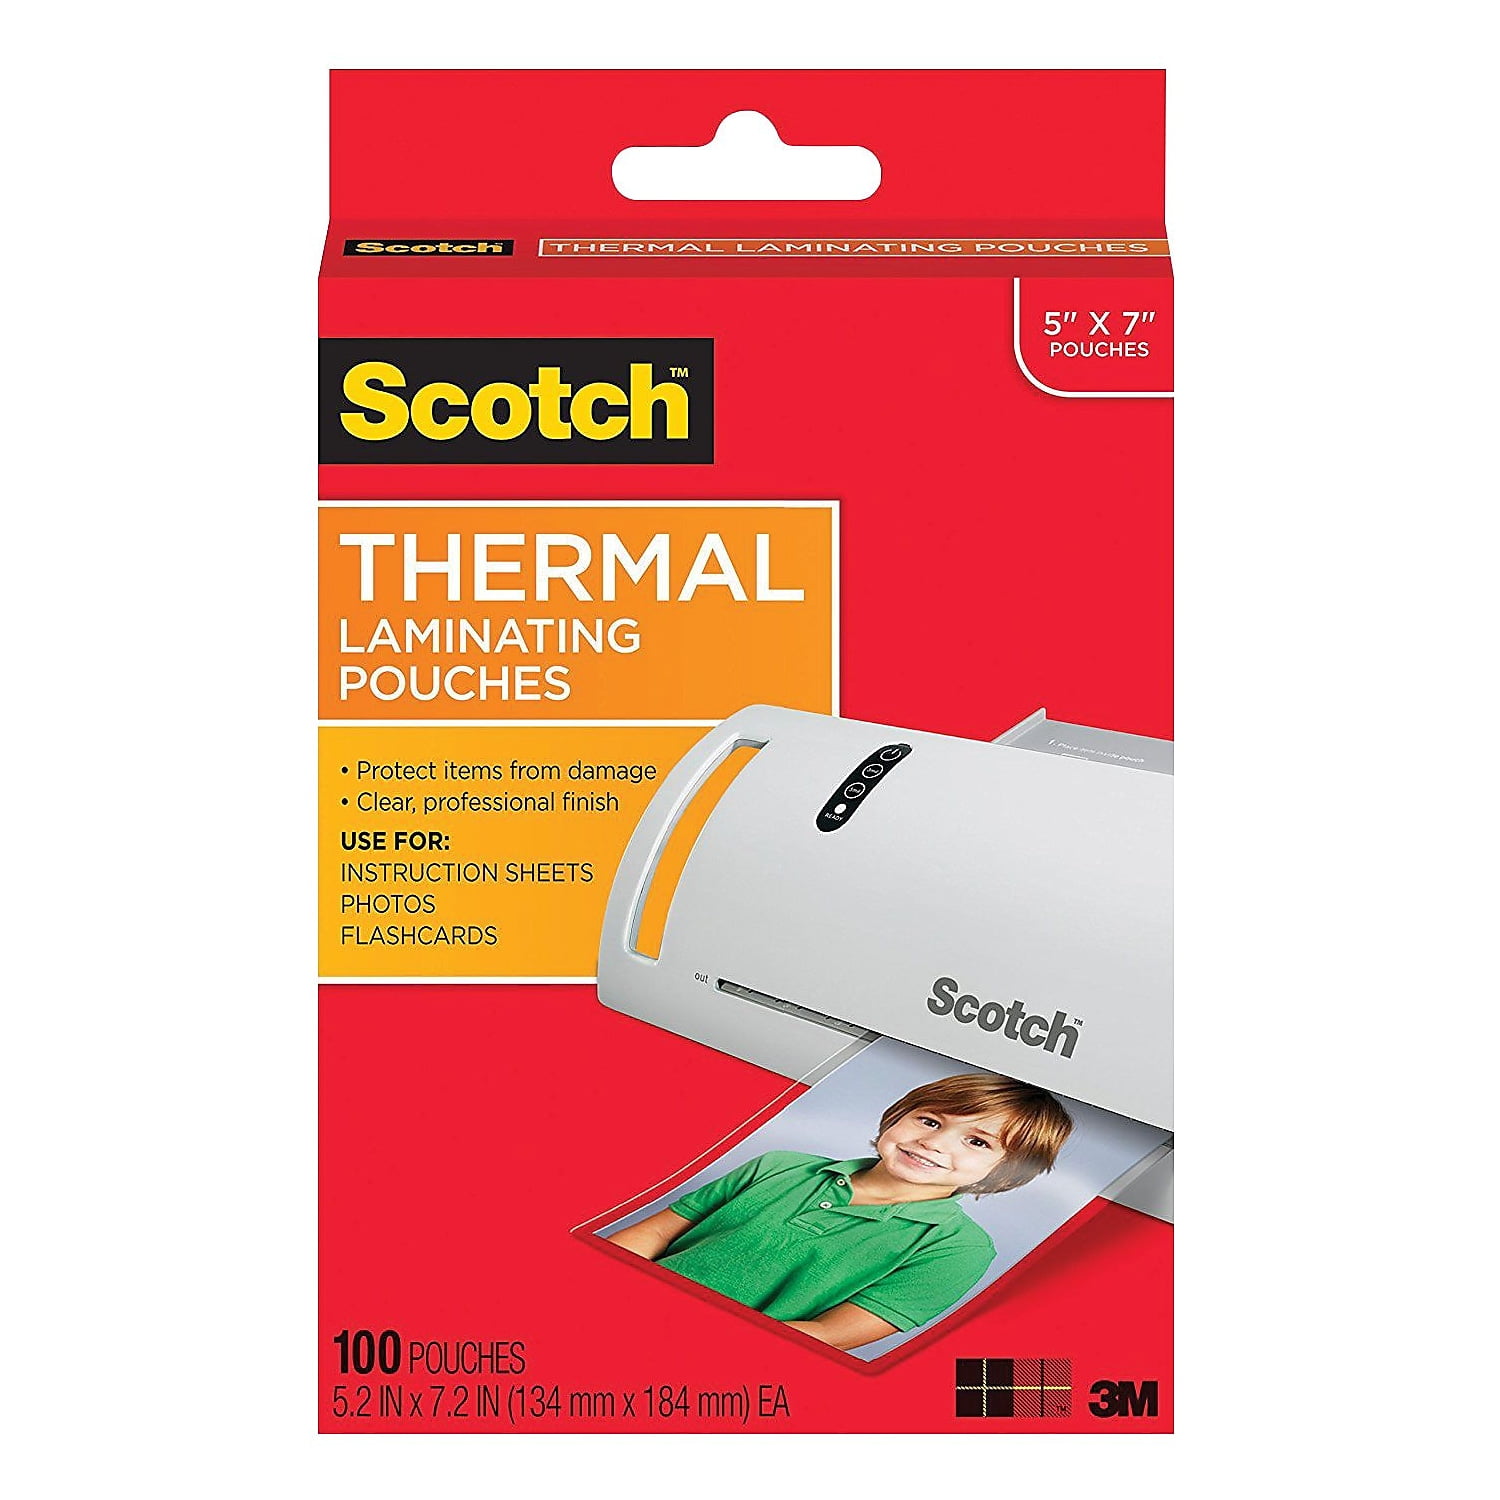 8.9 x 14.4-Inches Legal Size 20-Pack Scotch Thermal Laminating Pouches 